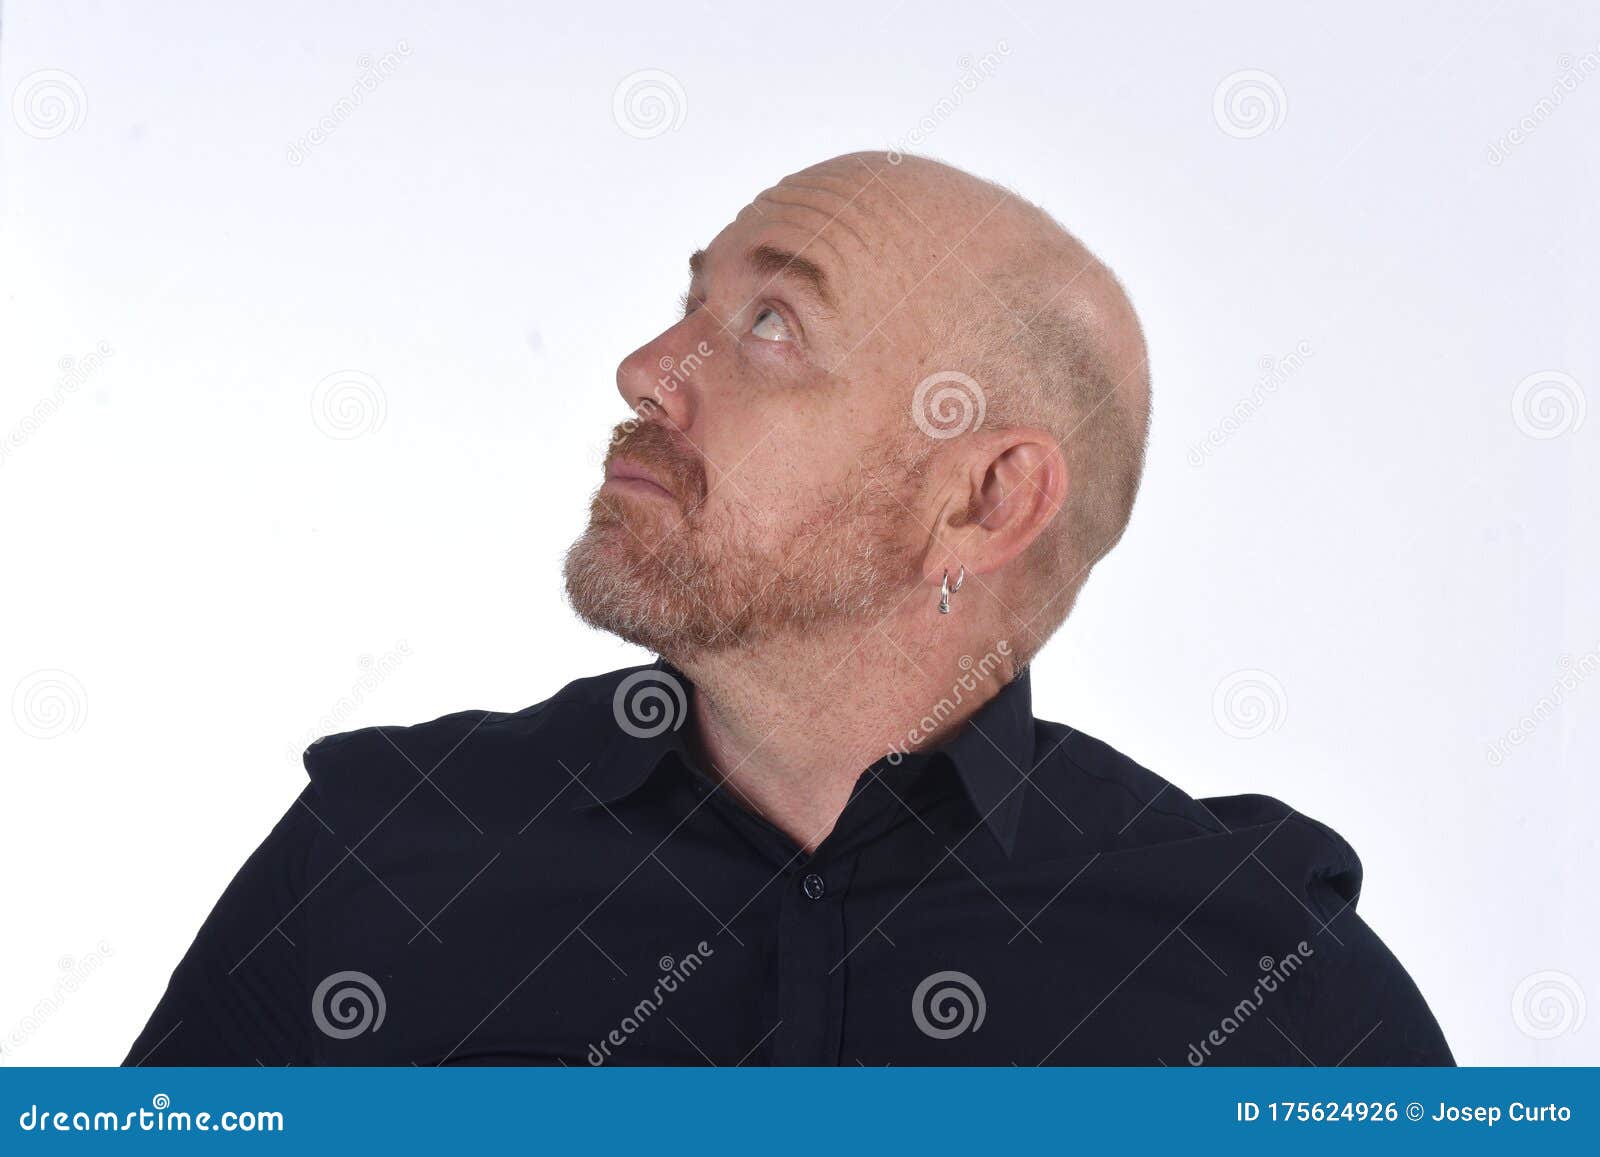 portrait of a bald man looking up on white